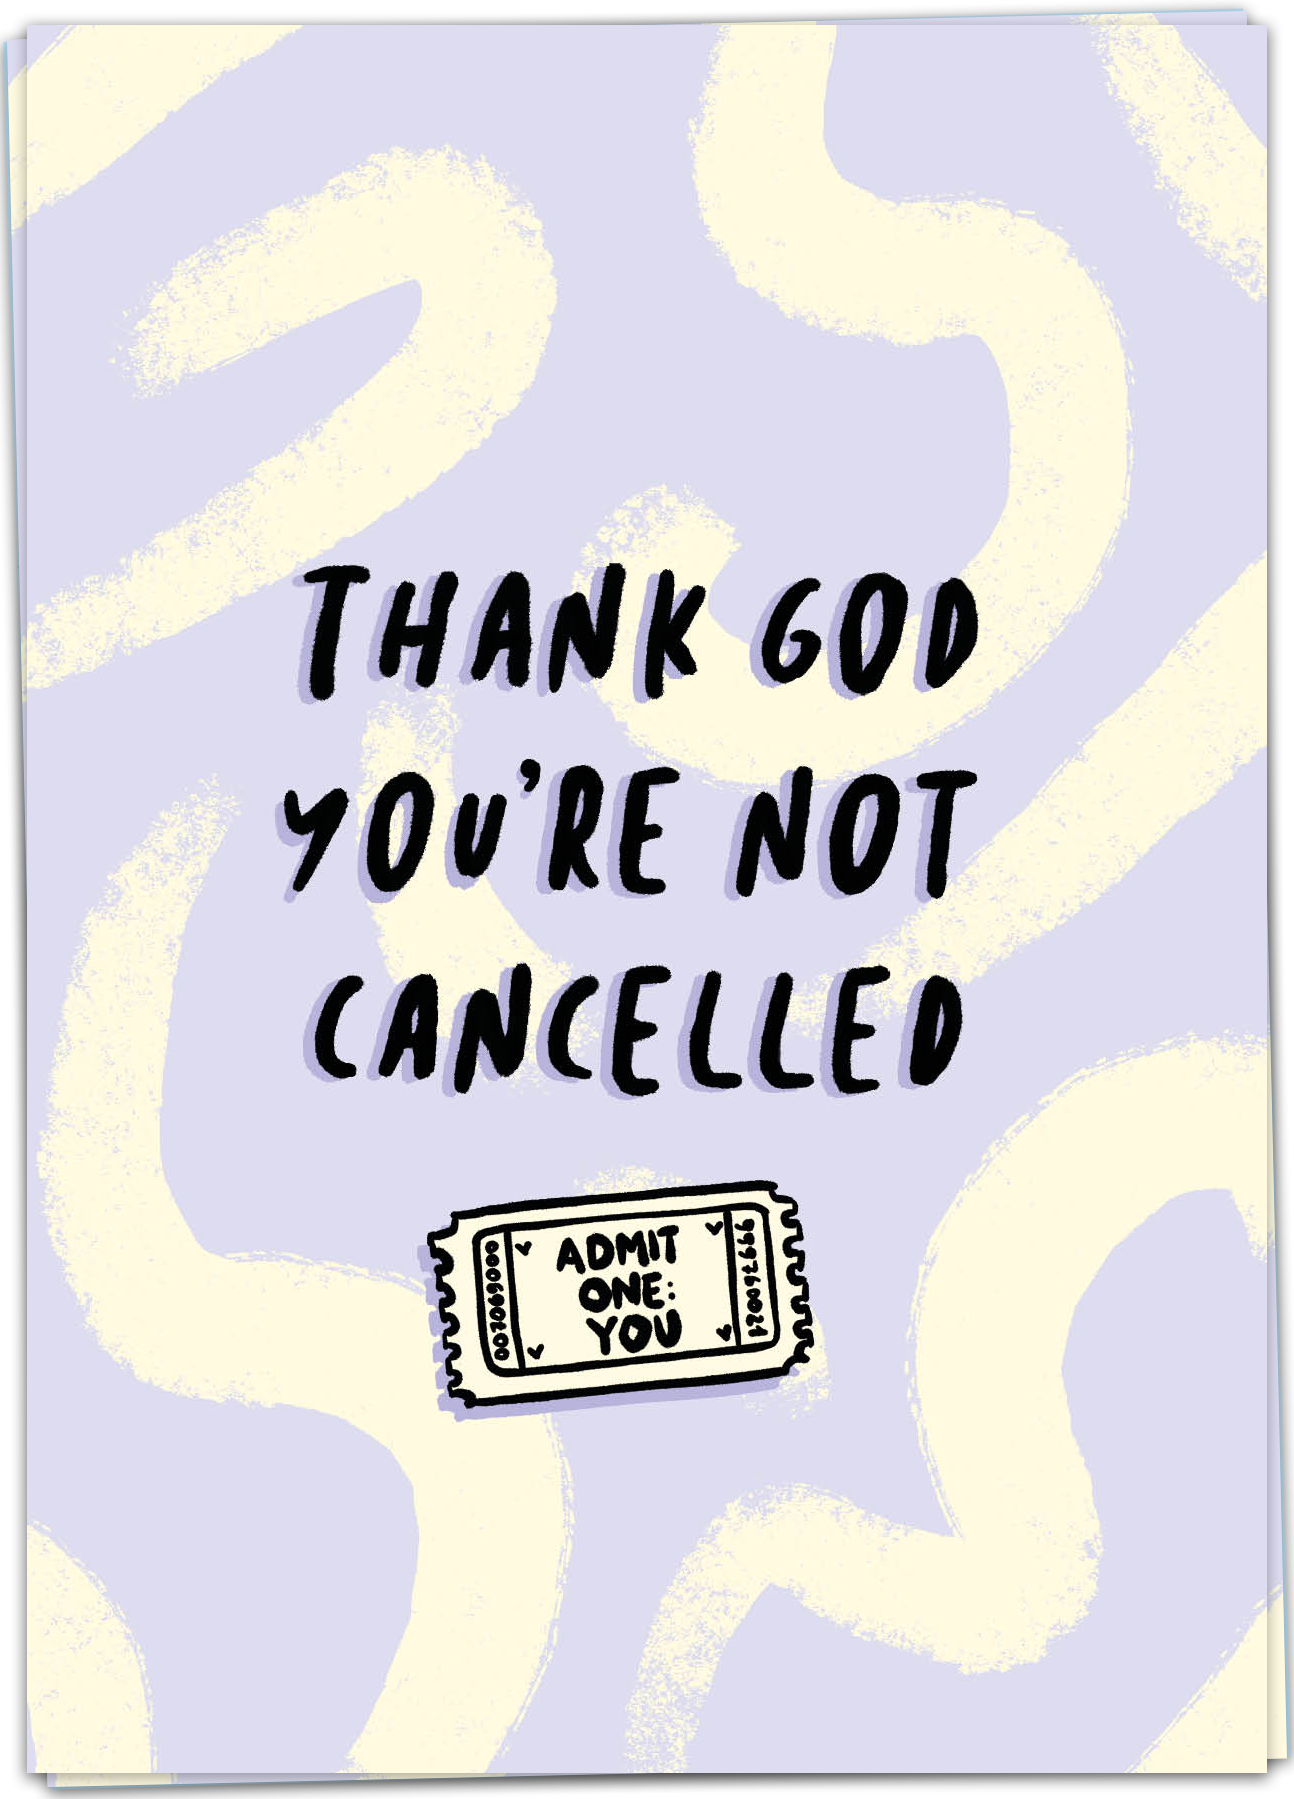 You're not cancelled